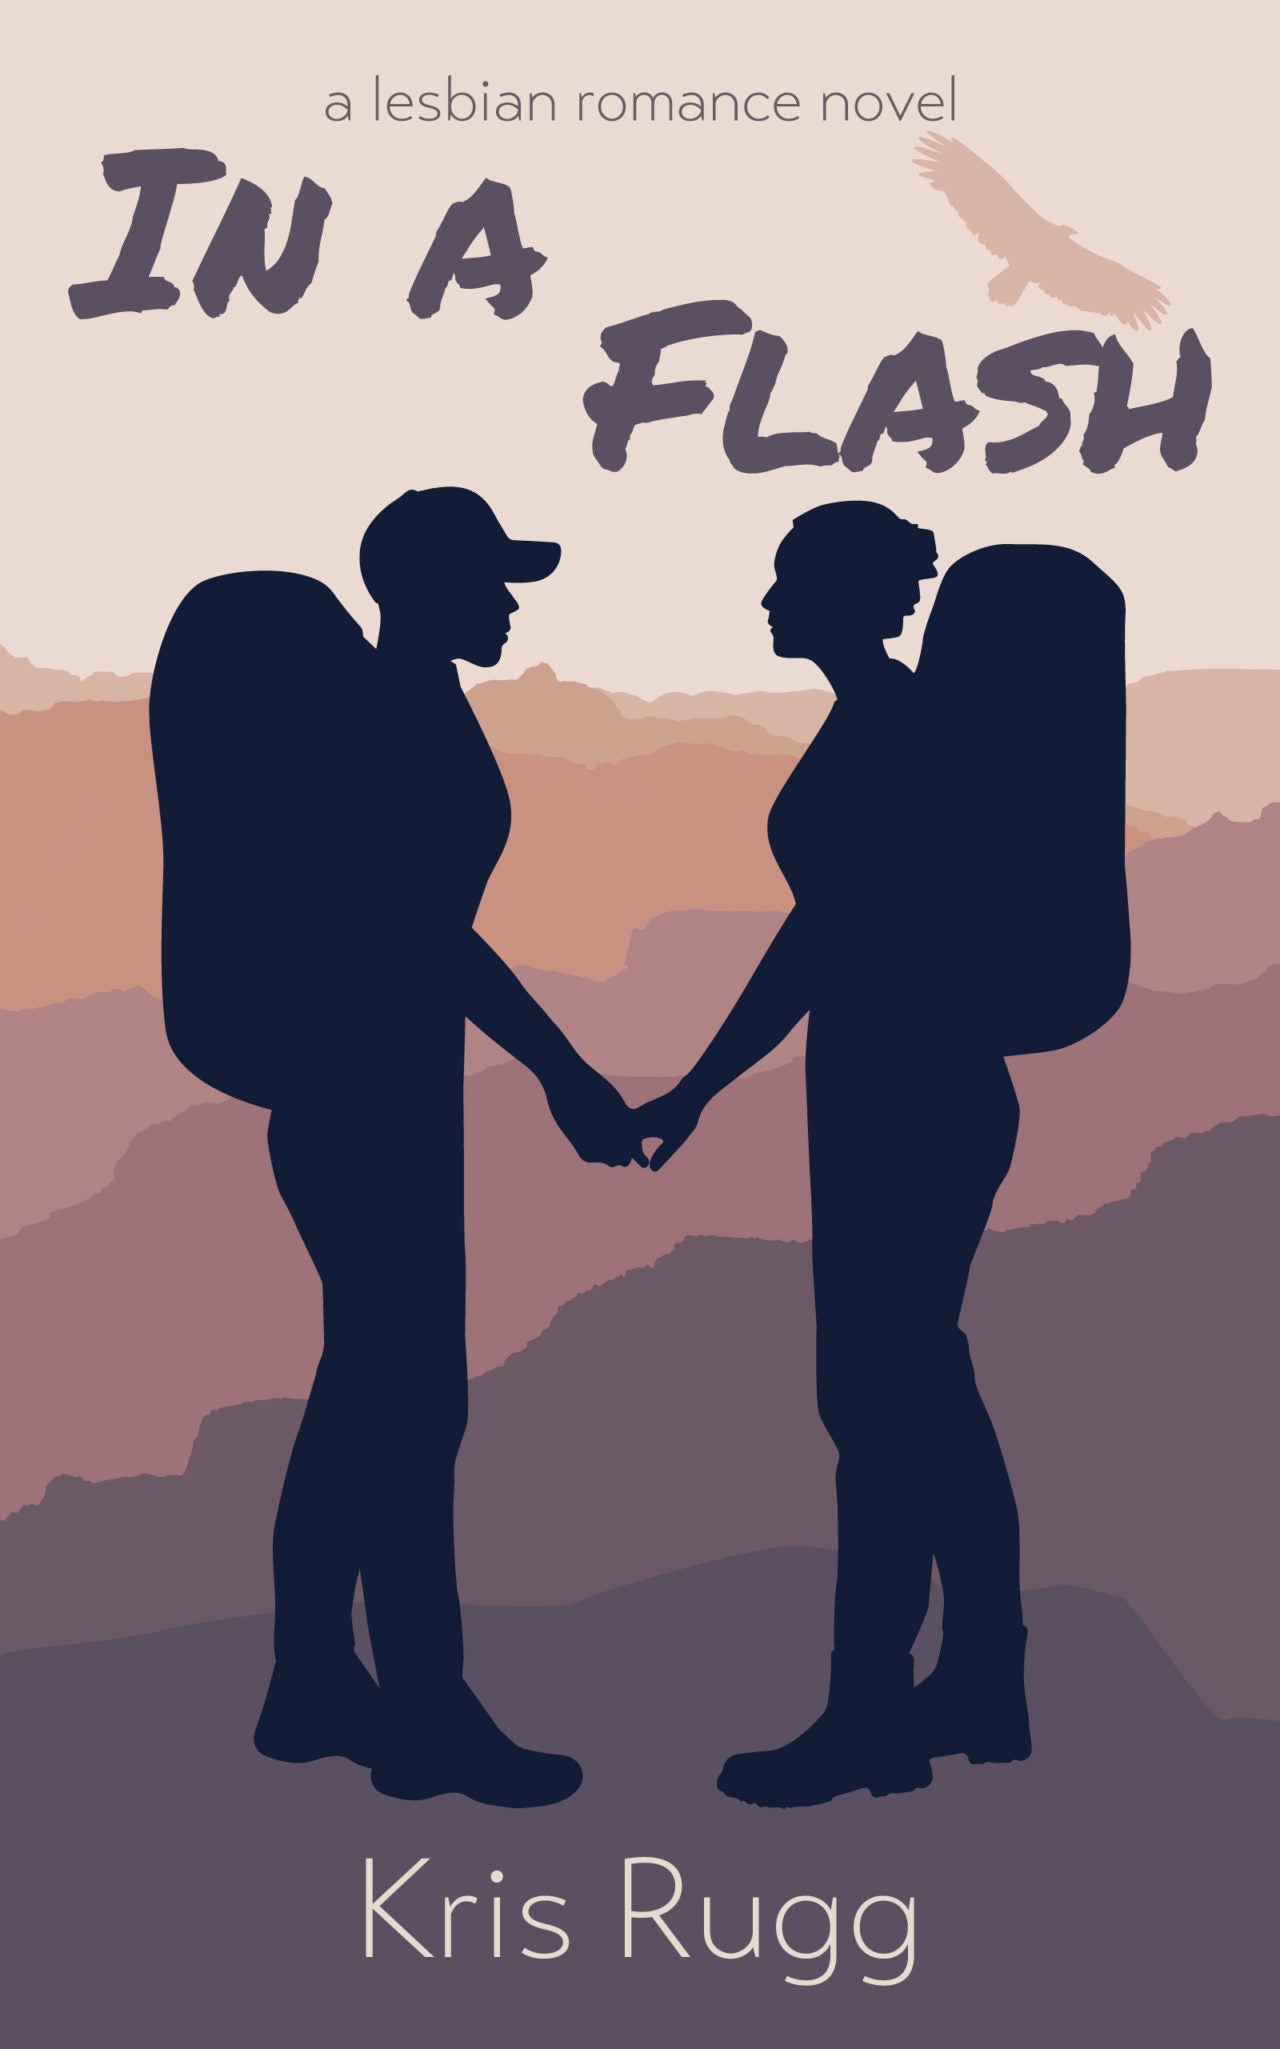 In a Flash by Kris Rugg